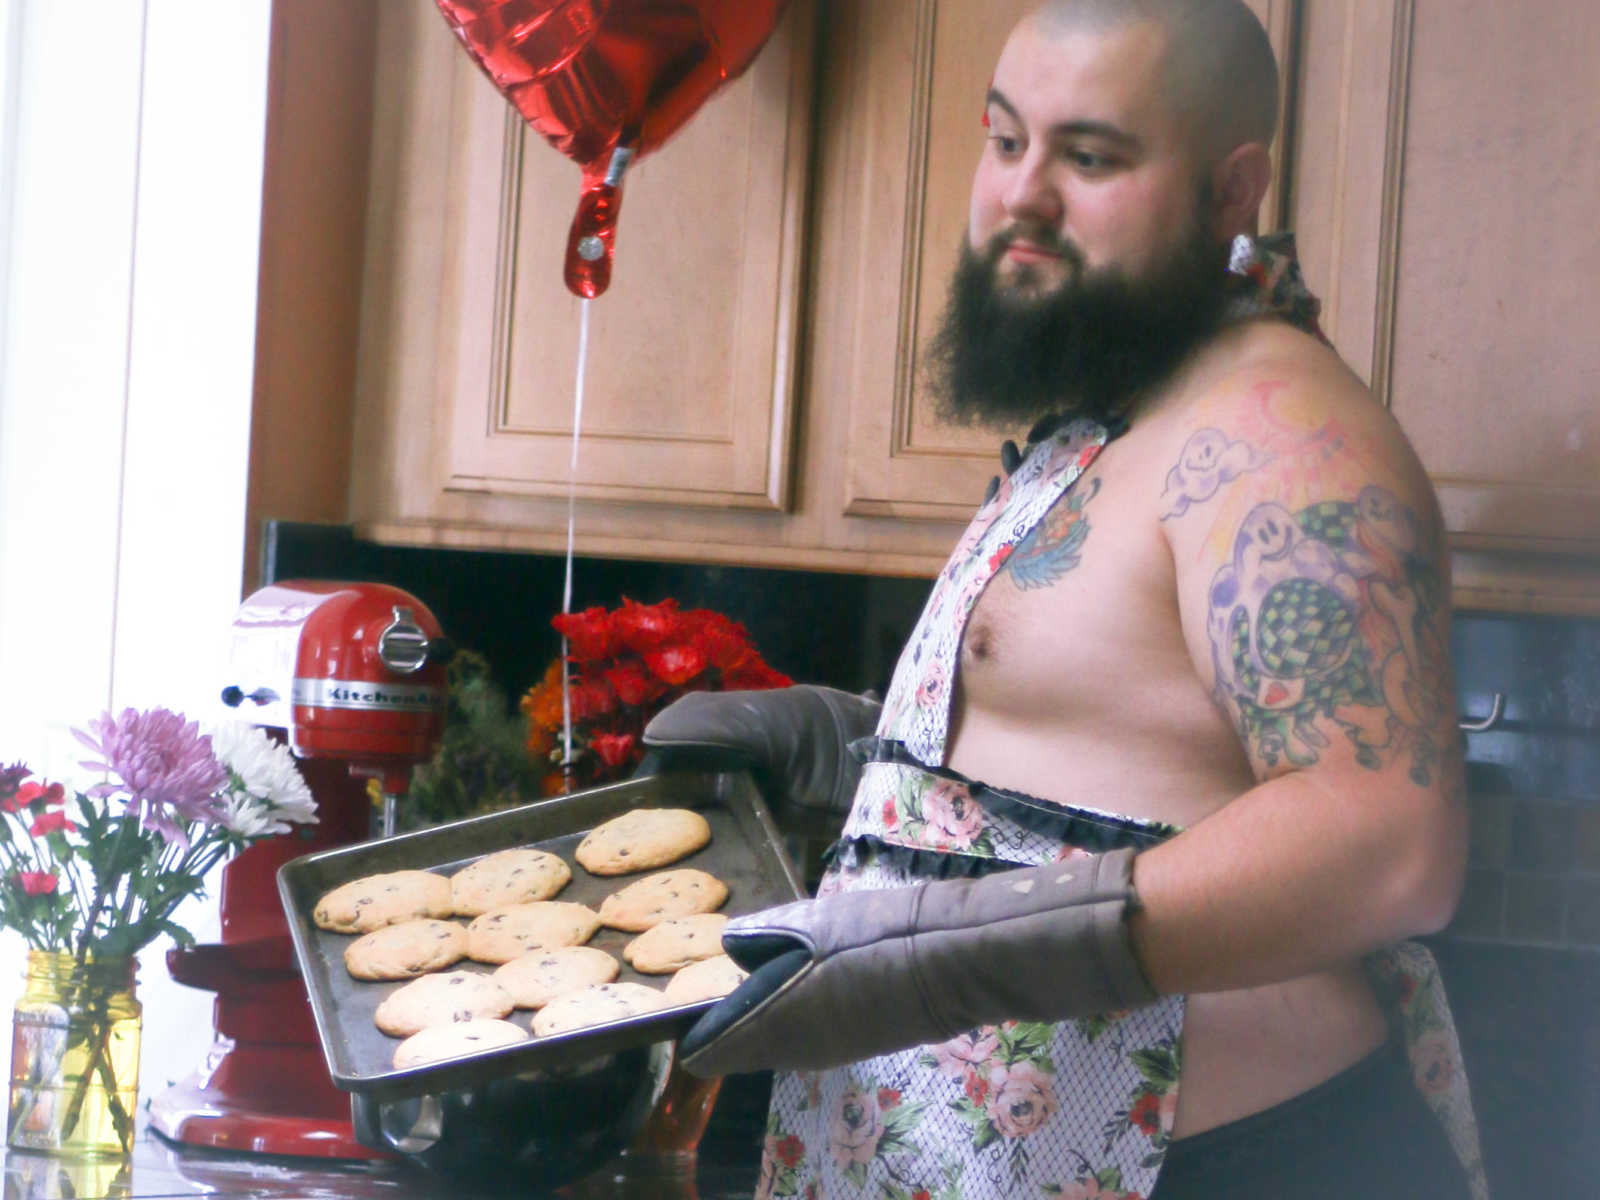 shirtless man wearing apron holds baking sheet of chocolate chip cookies in kitchen with flowers and heart balloon